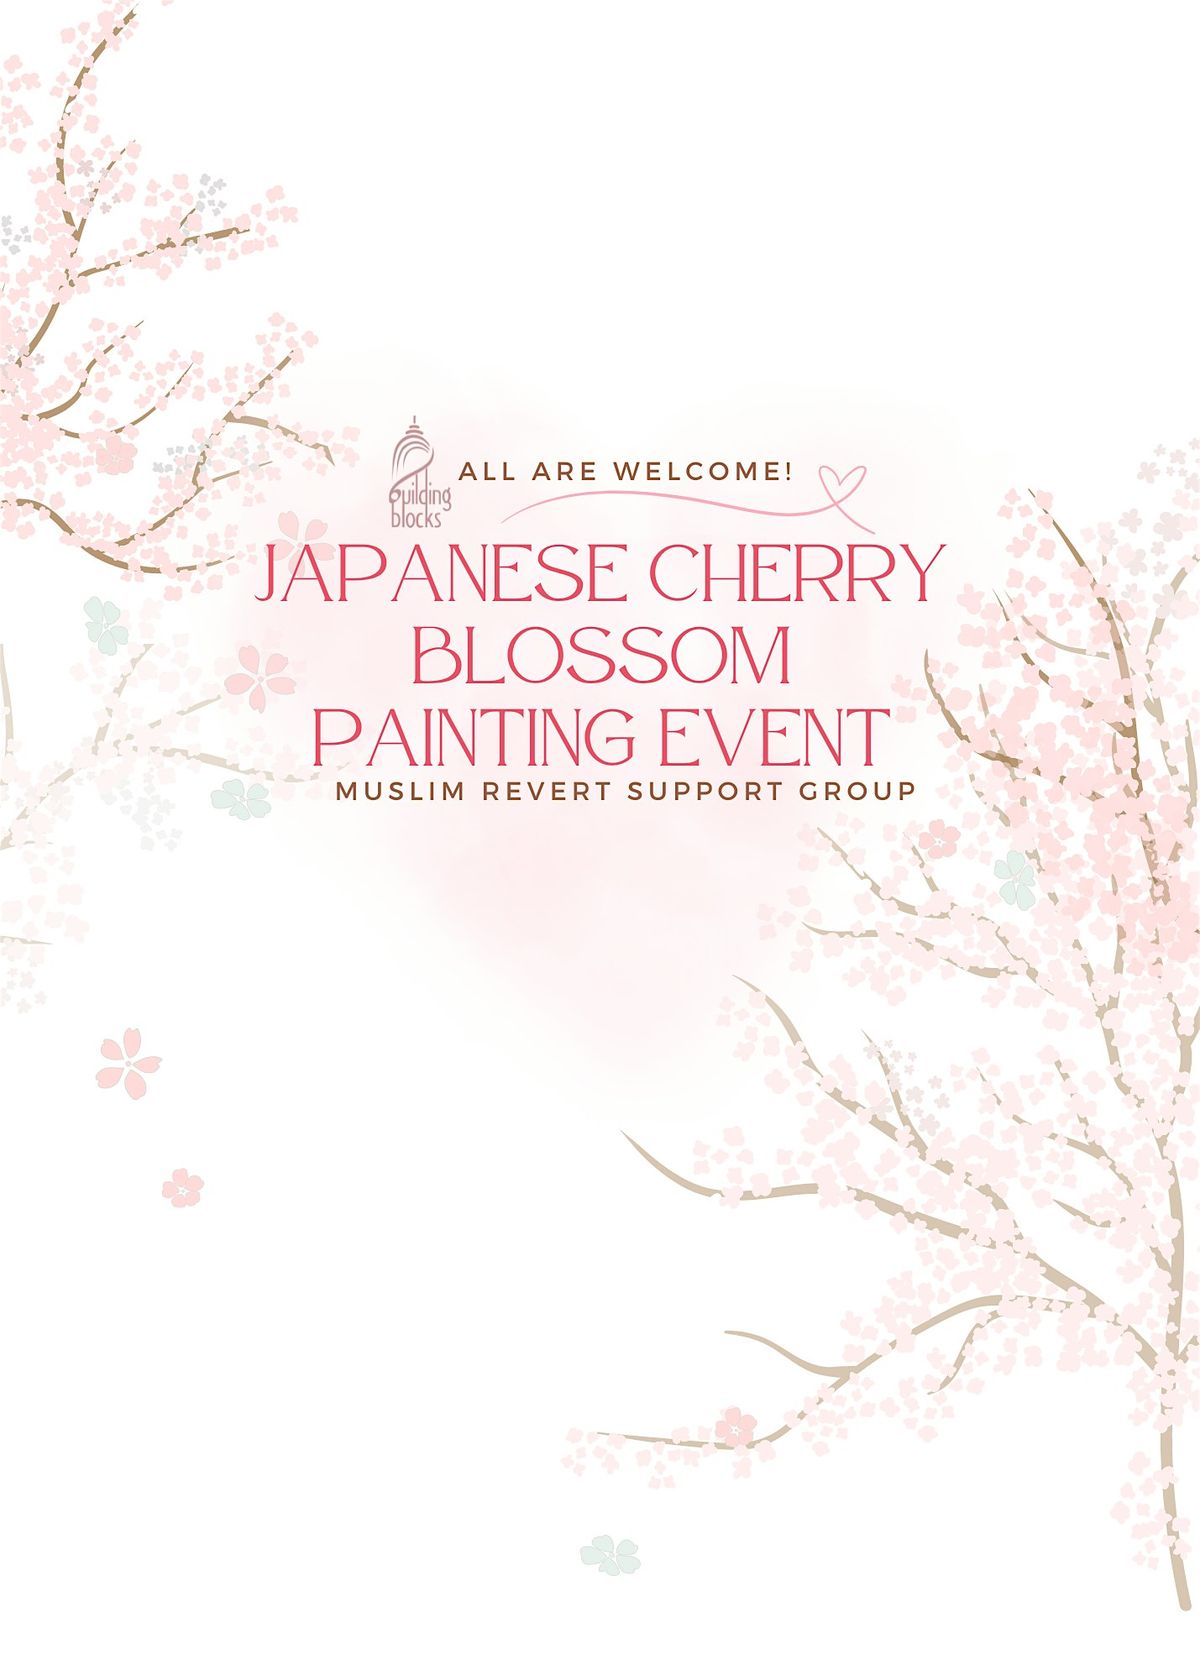 Japanese Cherry Blossom Painting Event